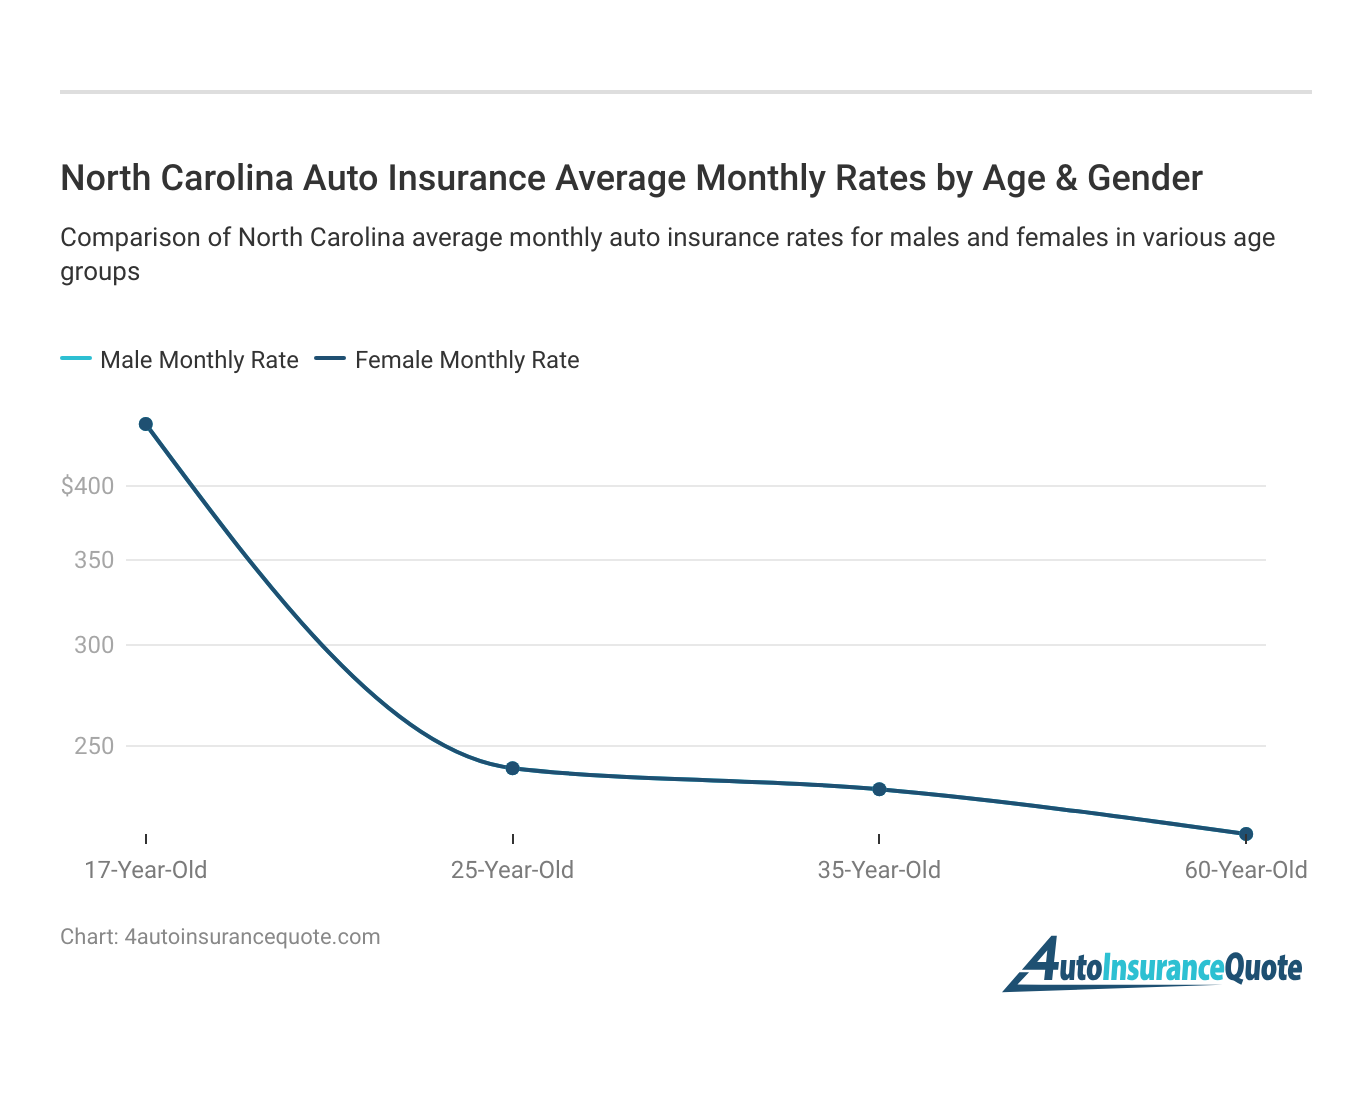 <h3>North Carolina Auto Insurance Average Monthly Rates by Age & Gender</h3>